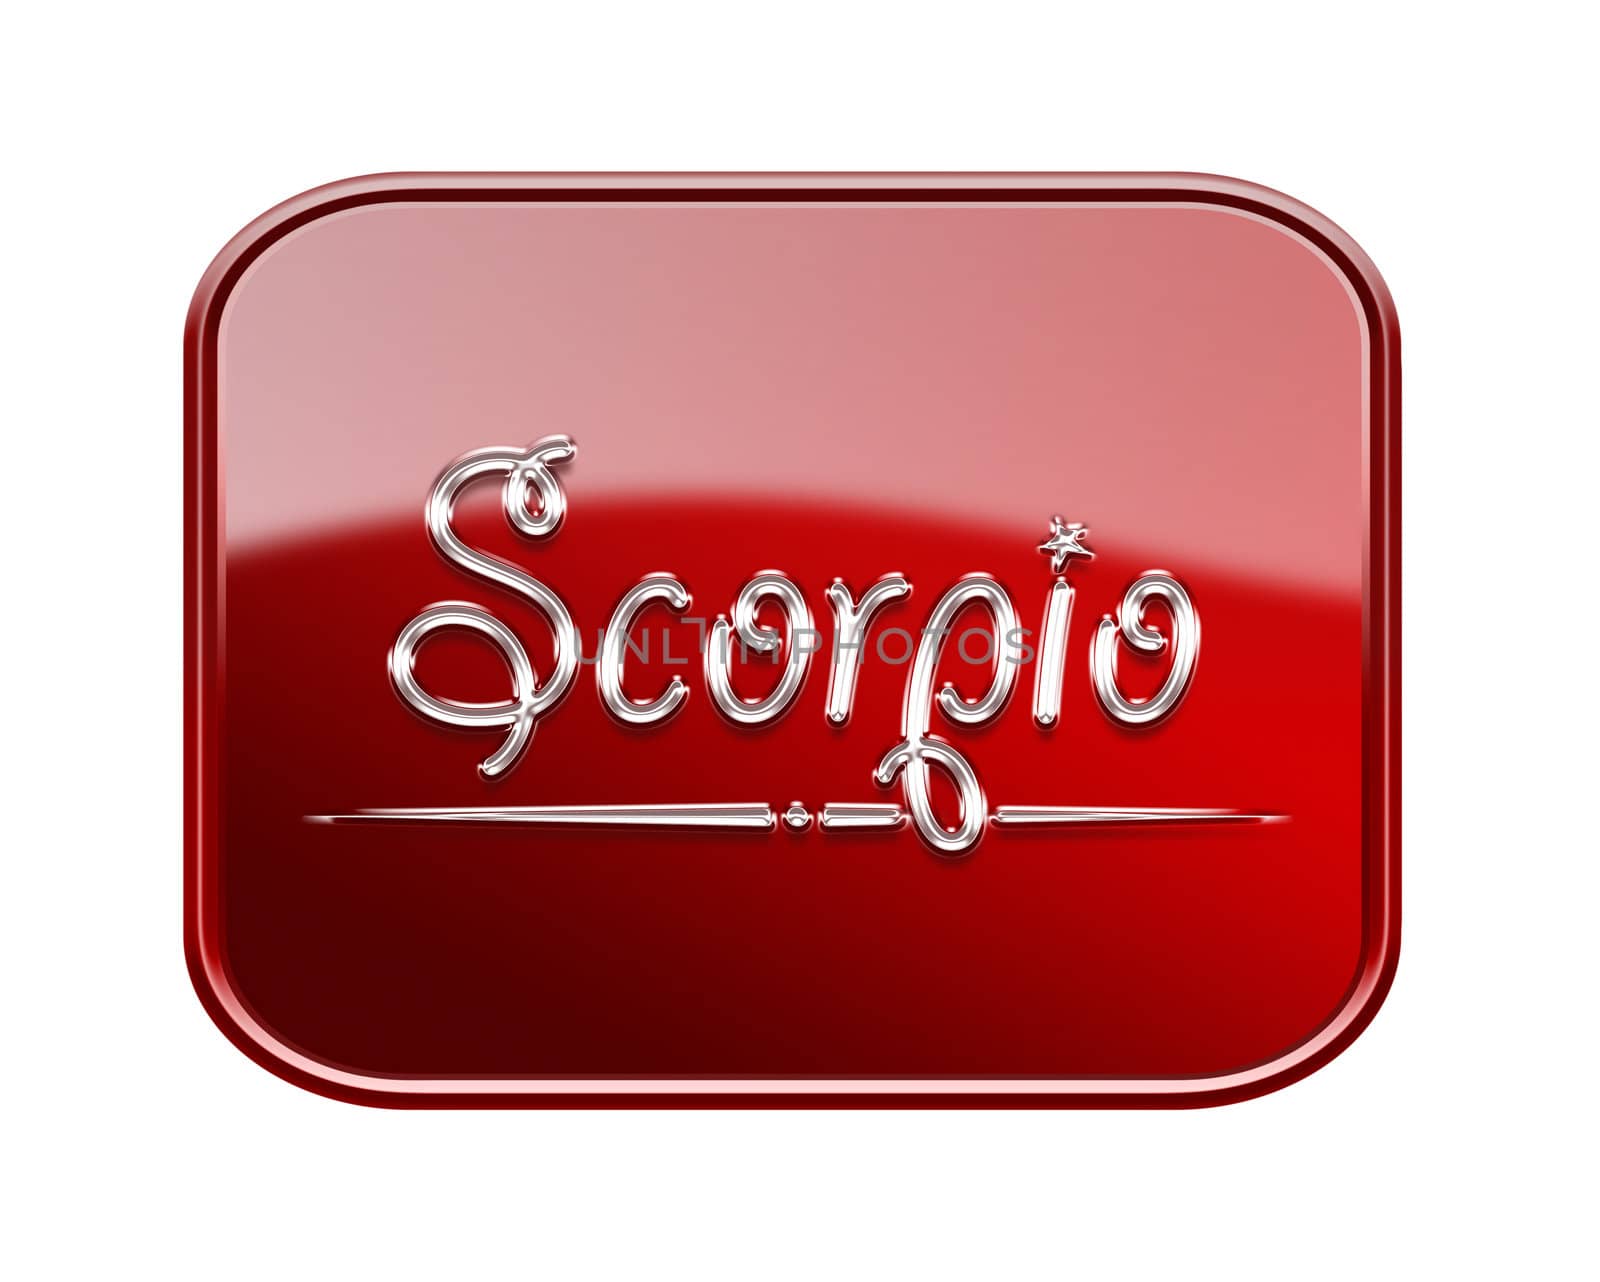 Scorpio zodiac icon red glossy, isolated on white background by zeffss